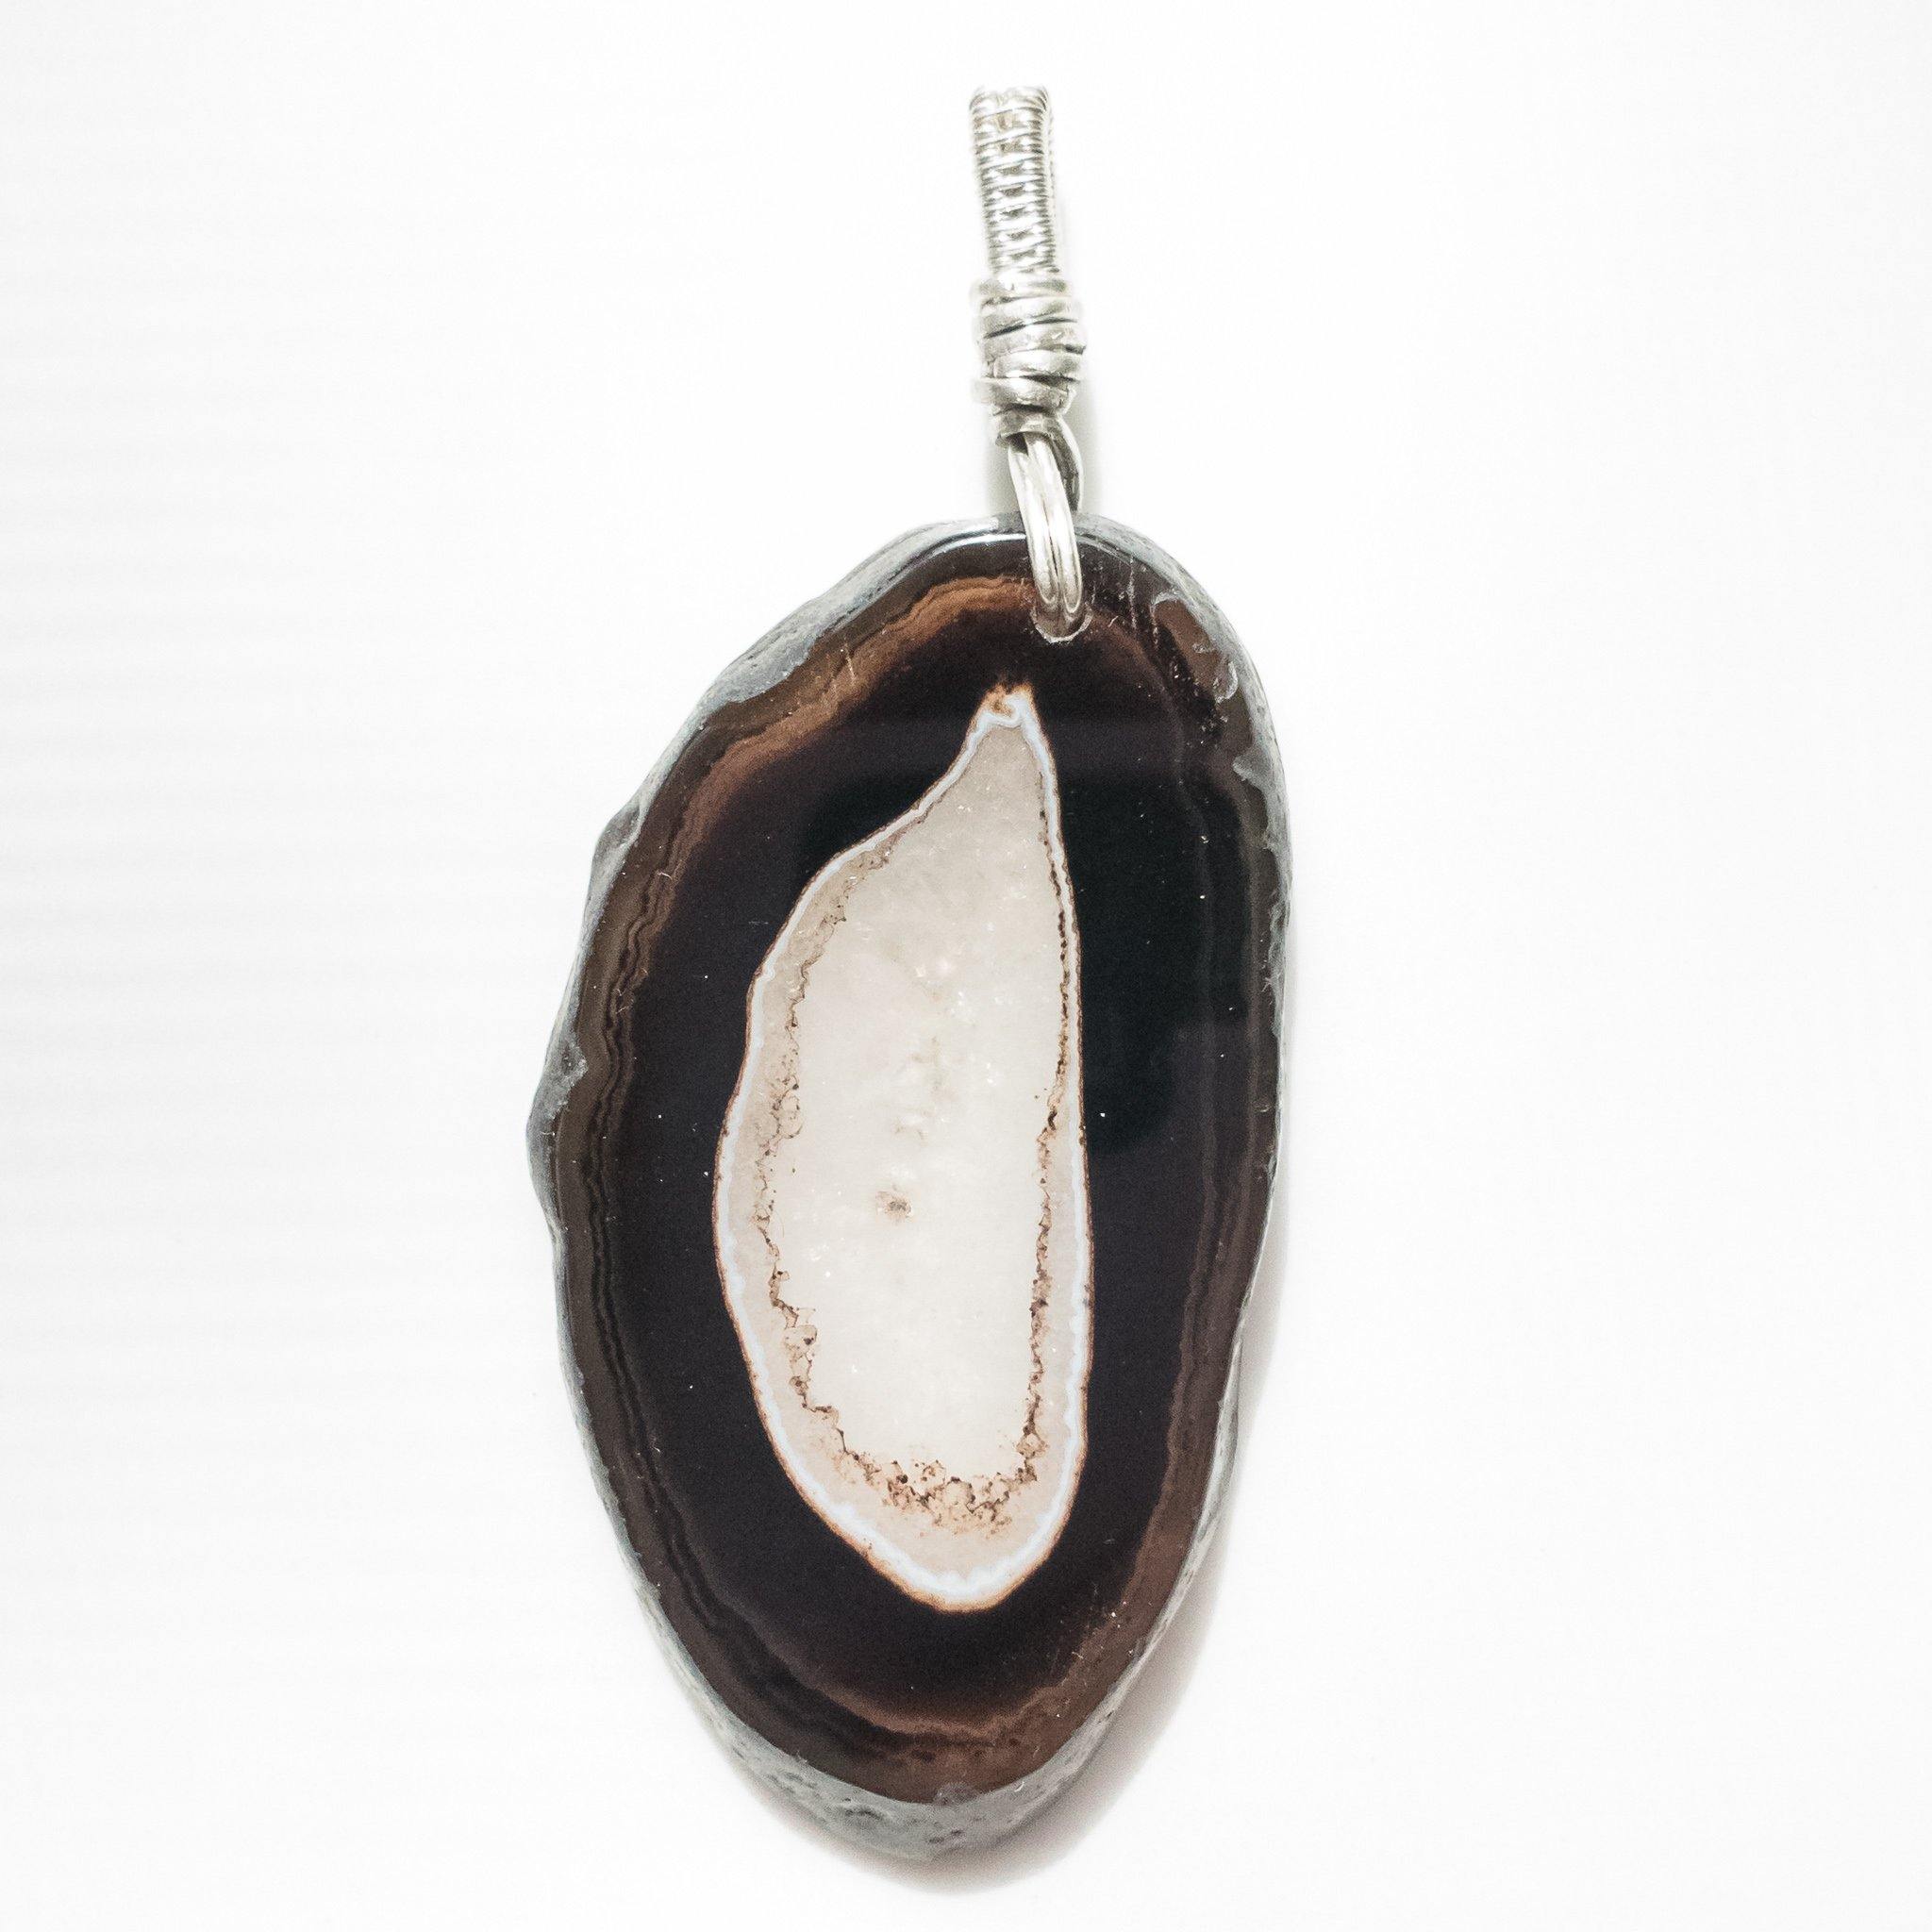 Unique Black and White Geode Crystal Necklace - designed to be worn on both sides - BellaChel Jeweler